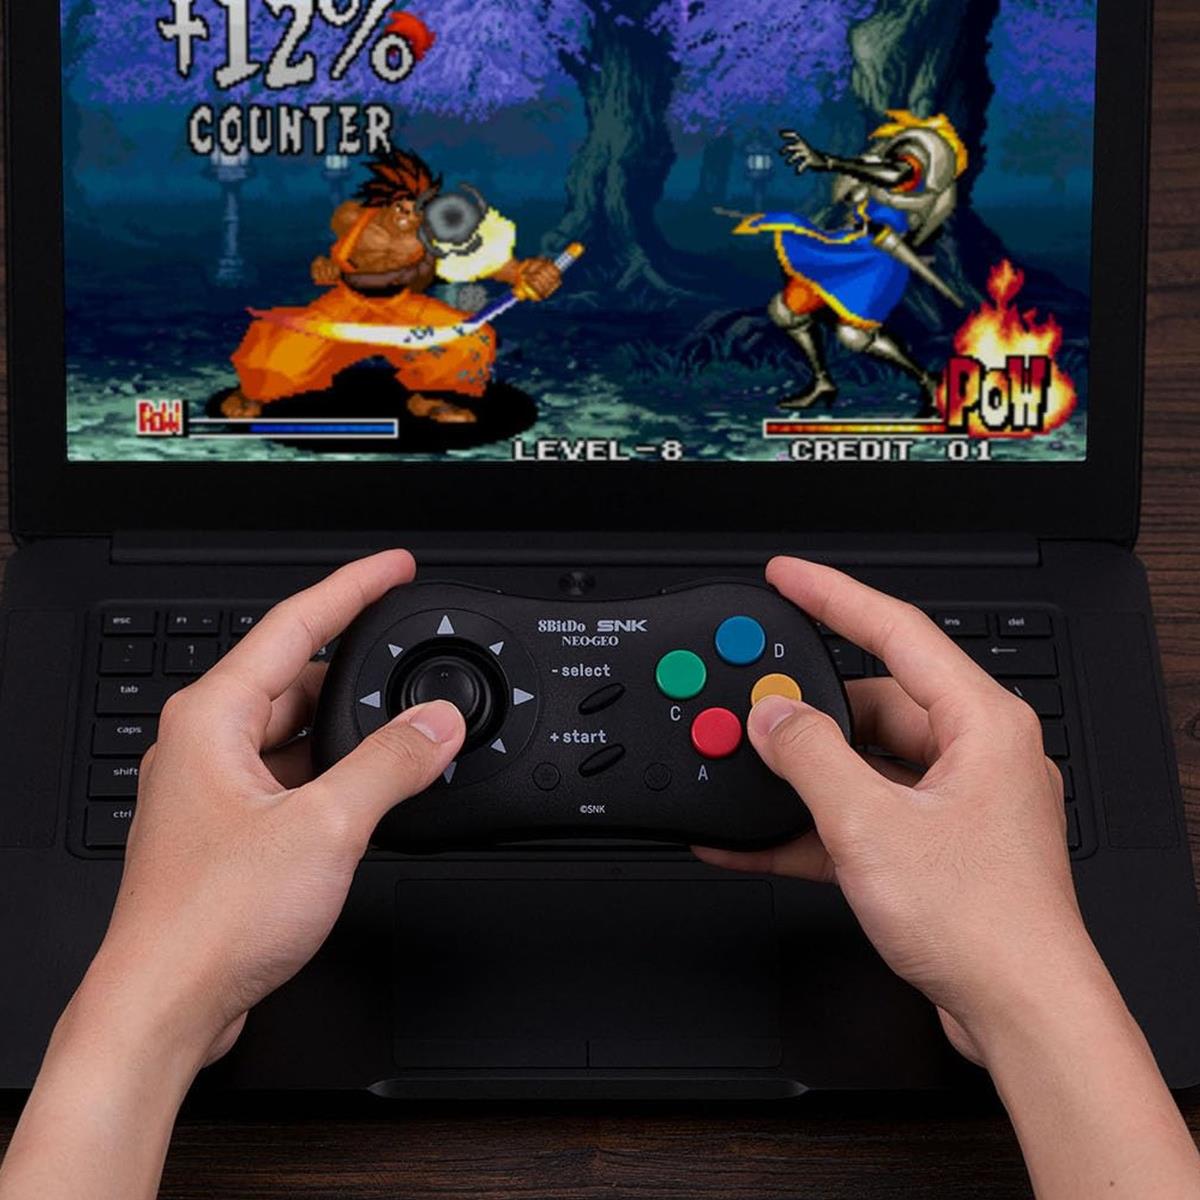 Have you ever played a Neo Geo (or Neo Geo CD) game? Retro